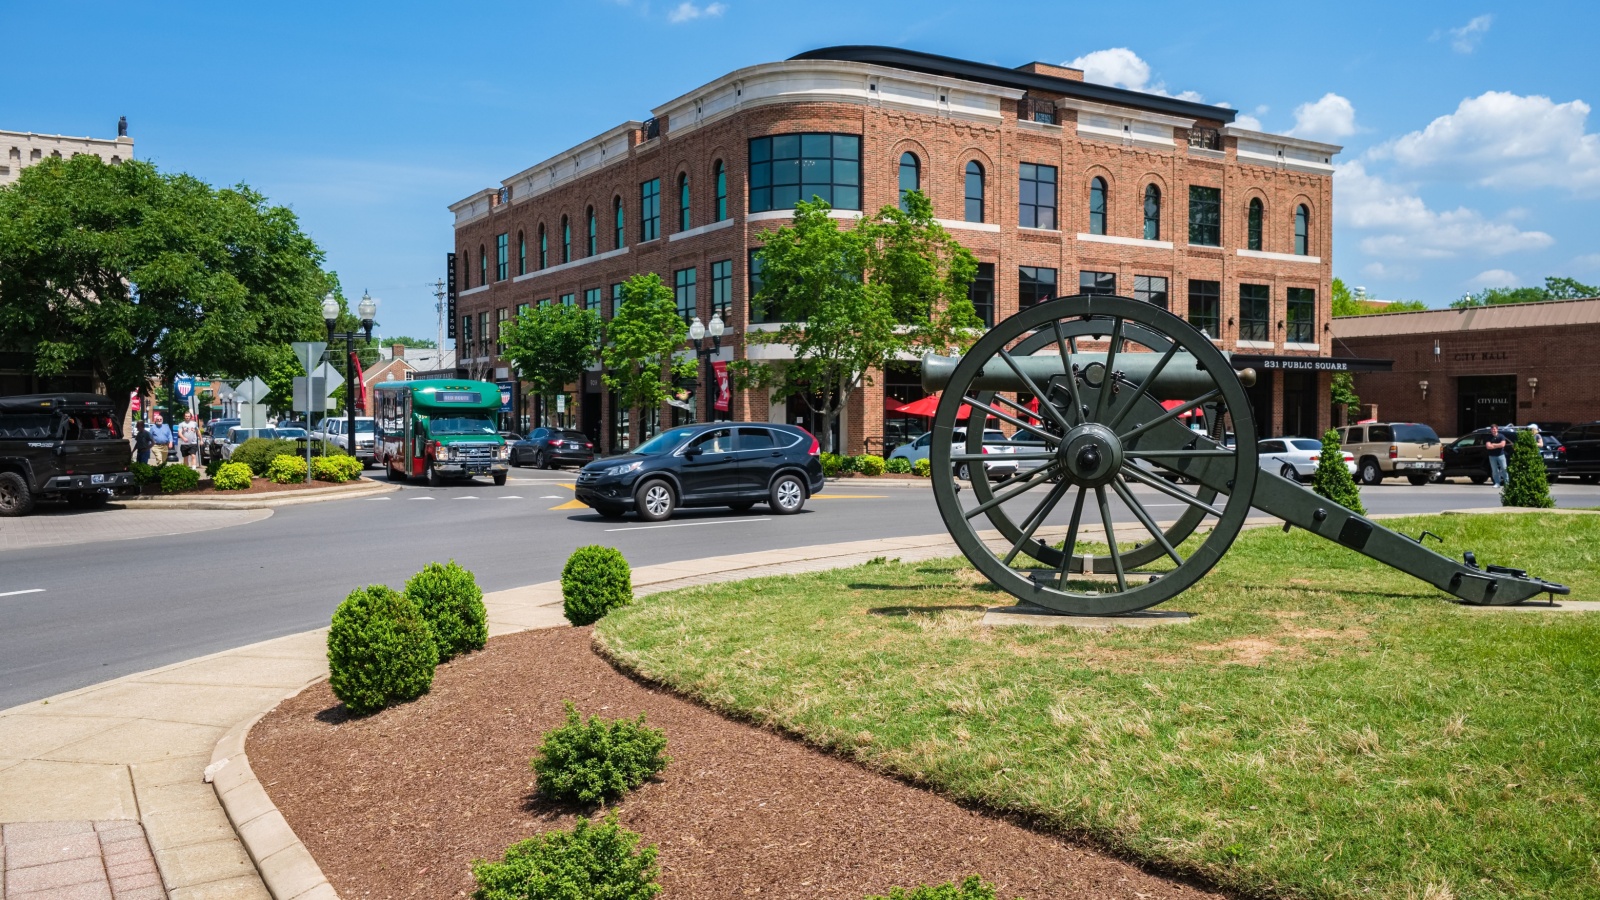 image credit: Fotoluminate LLC/Shutterstock <p>The Battle of Franklin was among the bloodiest hours of the Civil War, known for its intense hand-to-hand combat. Today, the city of Franklin offers numerous historical sites related to the battle, including the Carter House and Carnton, both of which serve as museums detailing the tragic events. Visitors can also walk the five-mile battlefield loop, which connects key areas of the conflict.</p>